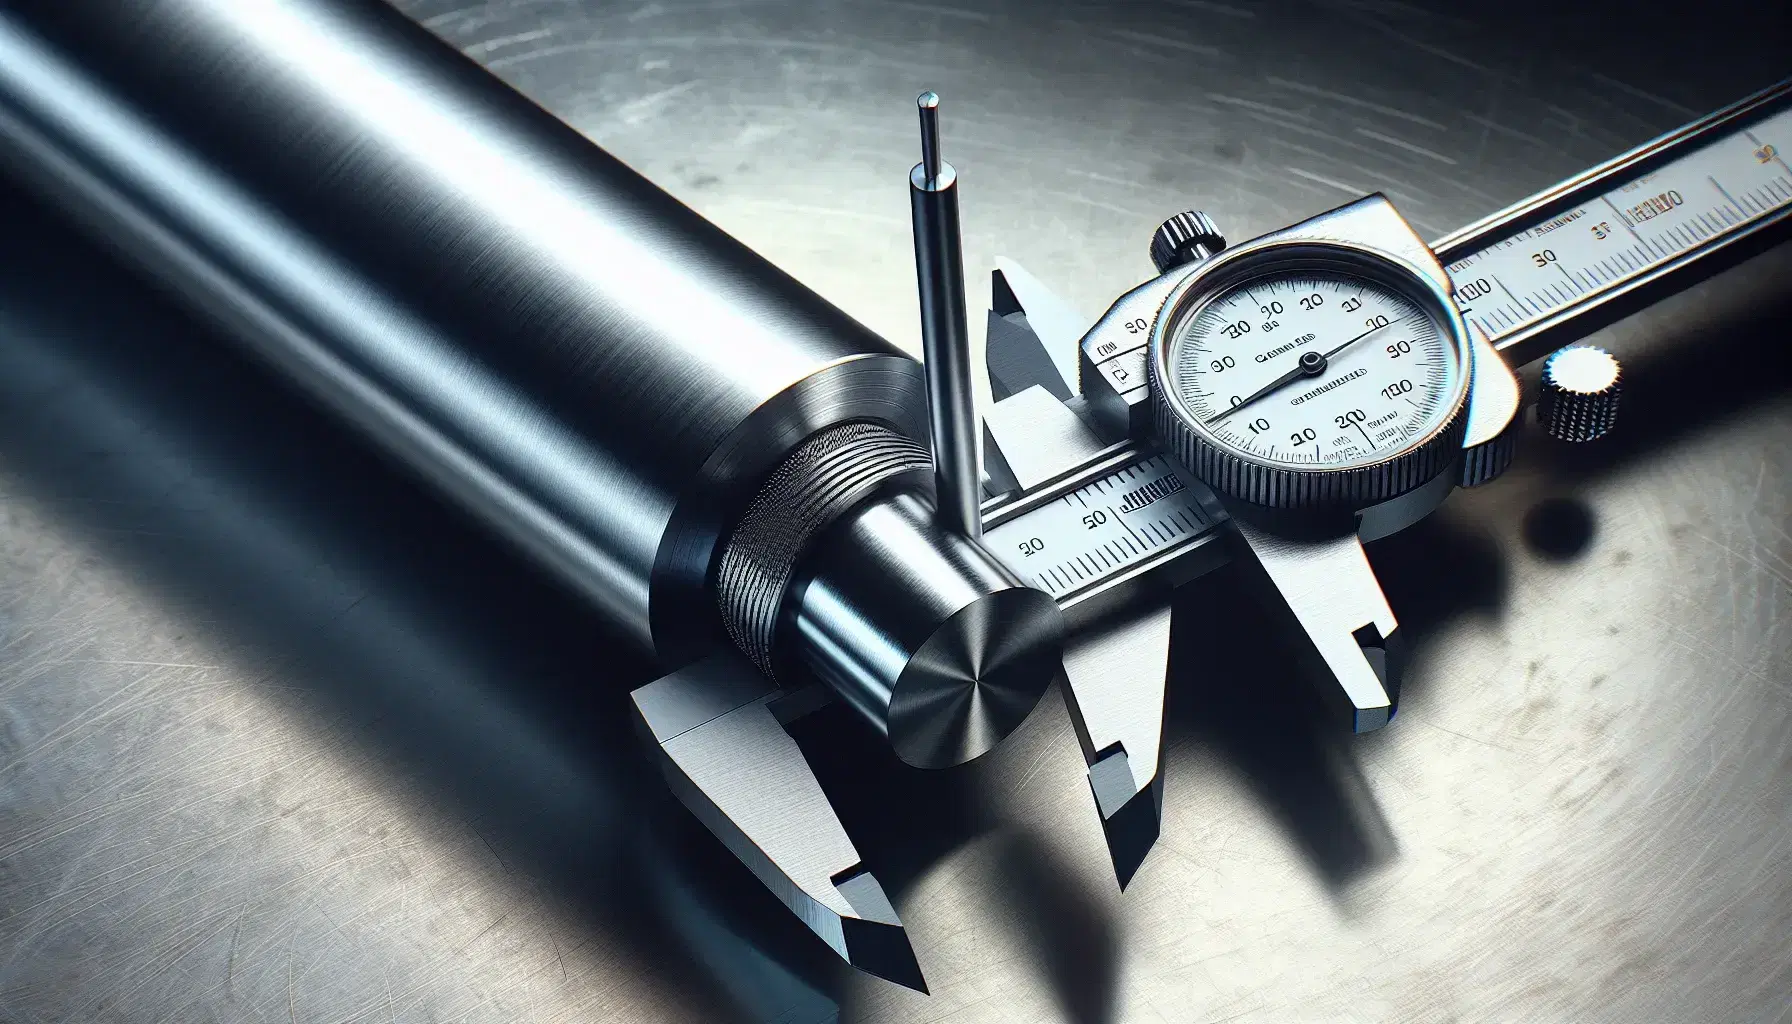 Vernier caliper measuring a polished metallic cylindrical rod, with internal jaws in contact, highlighting precision in a monochromatic setting.